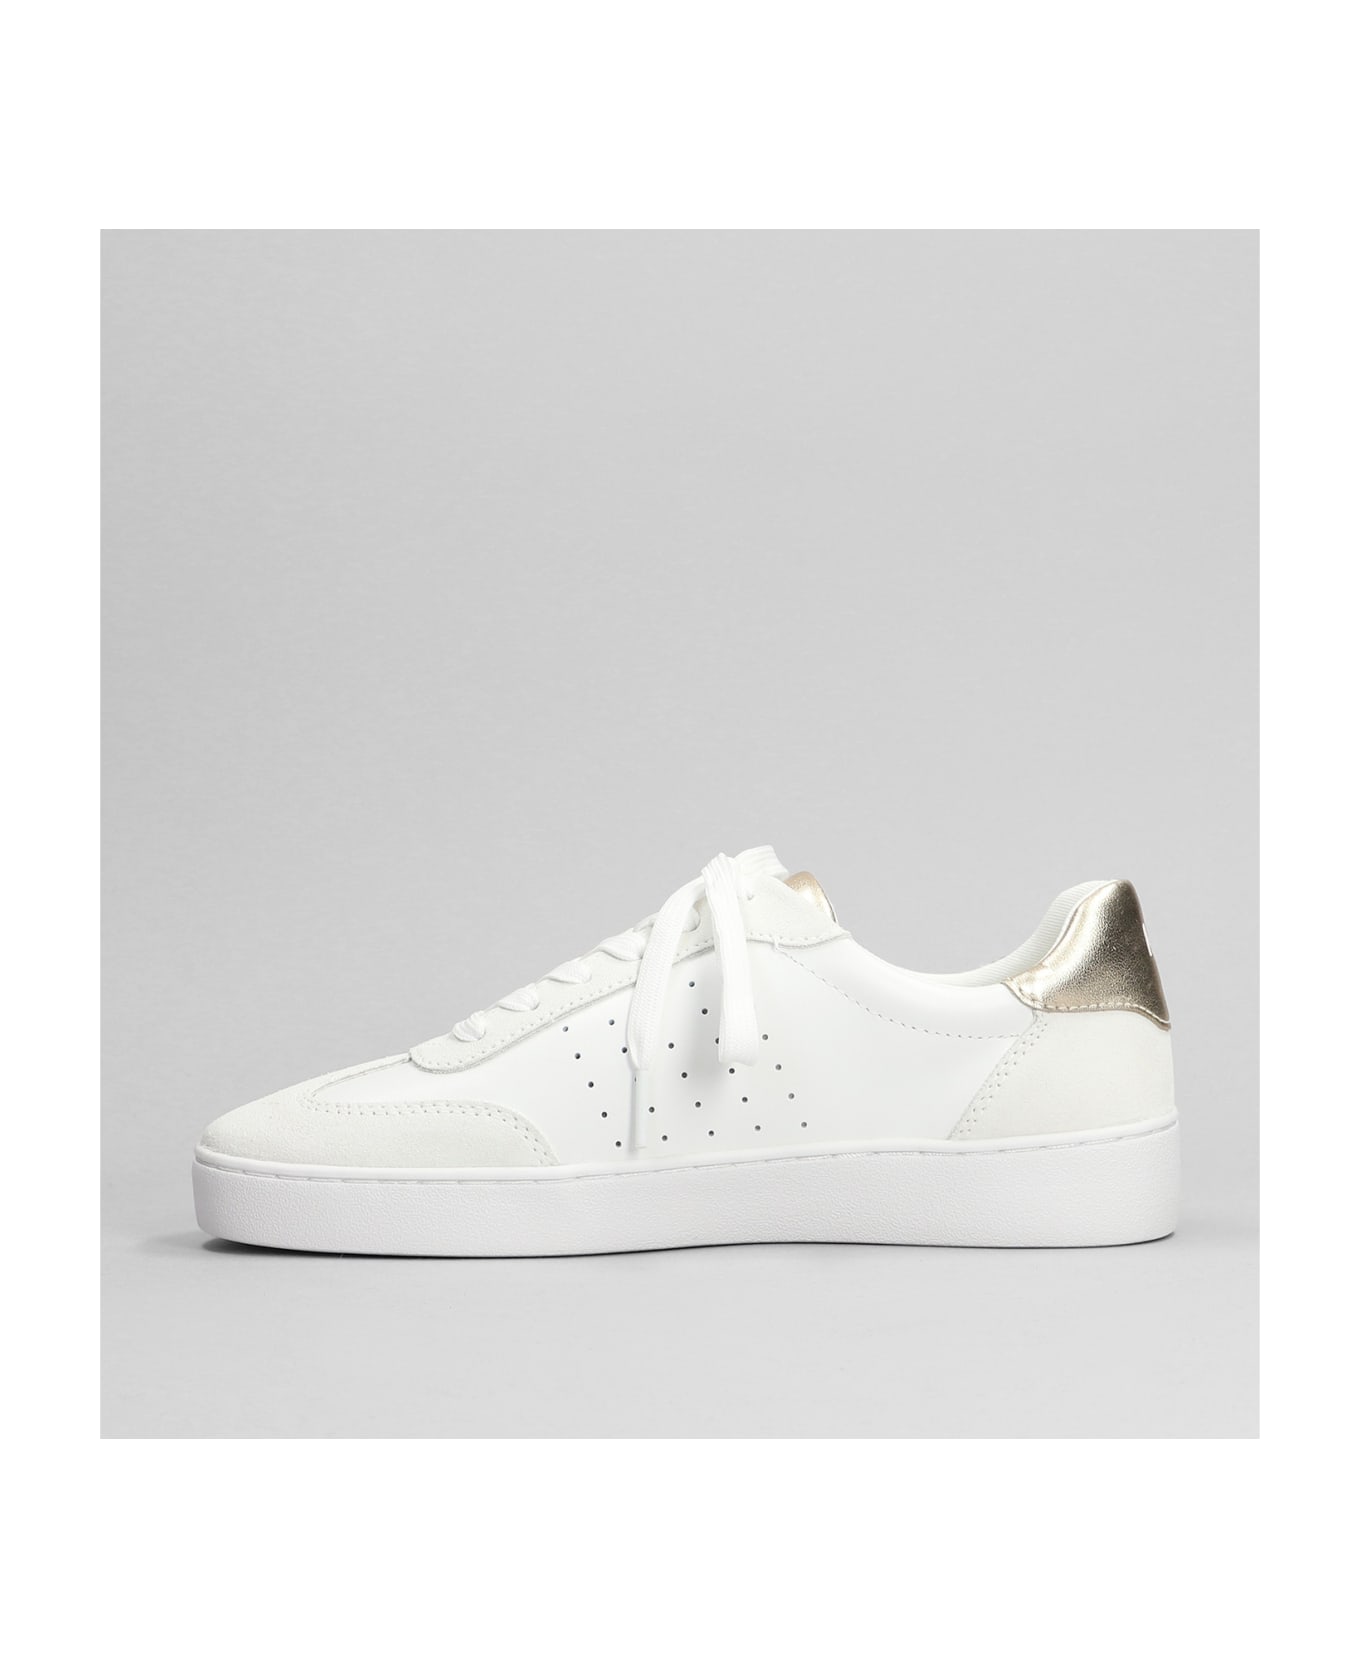 Michael Kors Scotty Sneakers In White Suede And Leather - Bianco